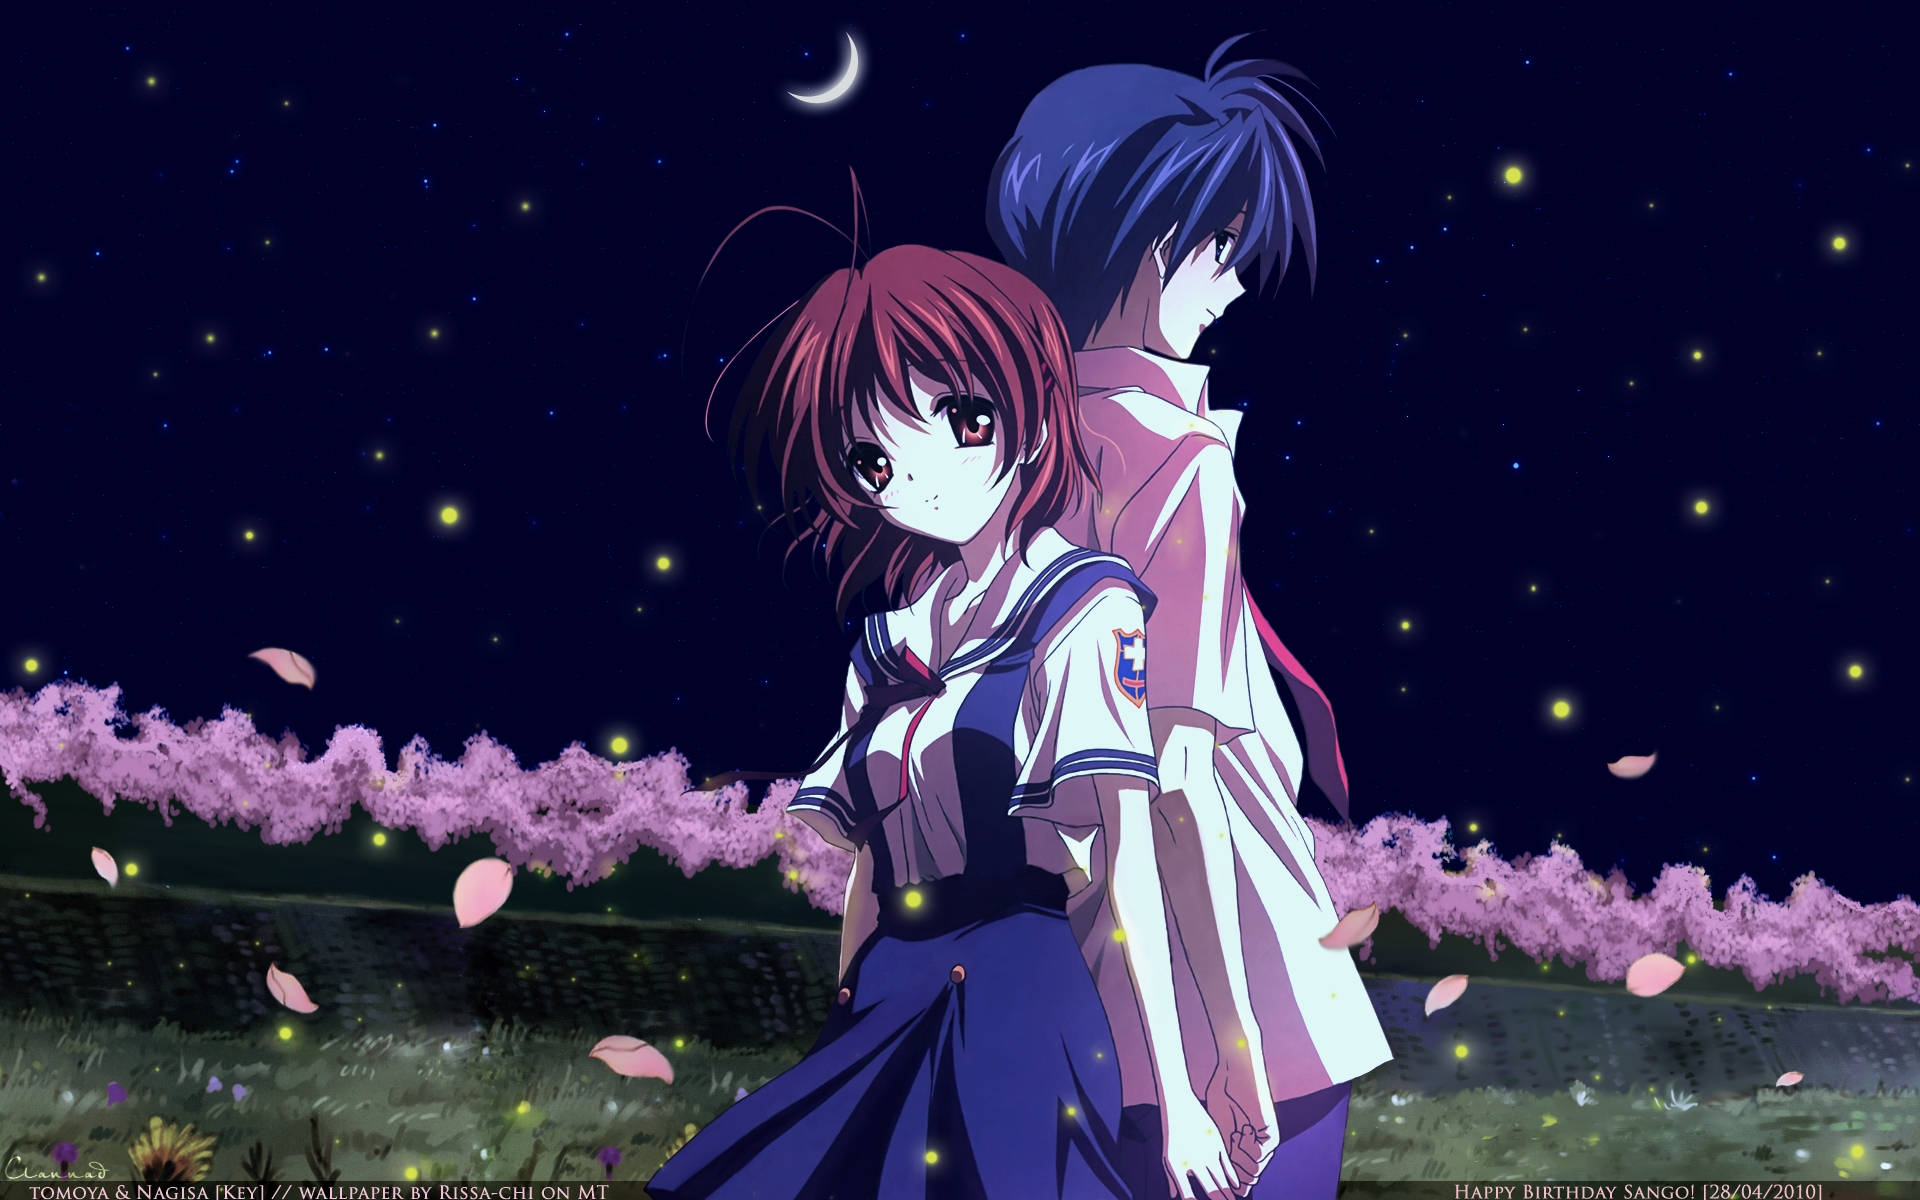 Download Top Anime Clannad Main Characters Wallpaper